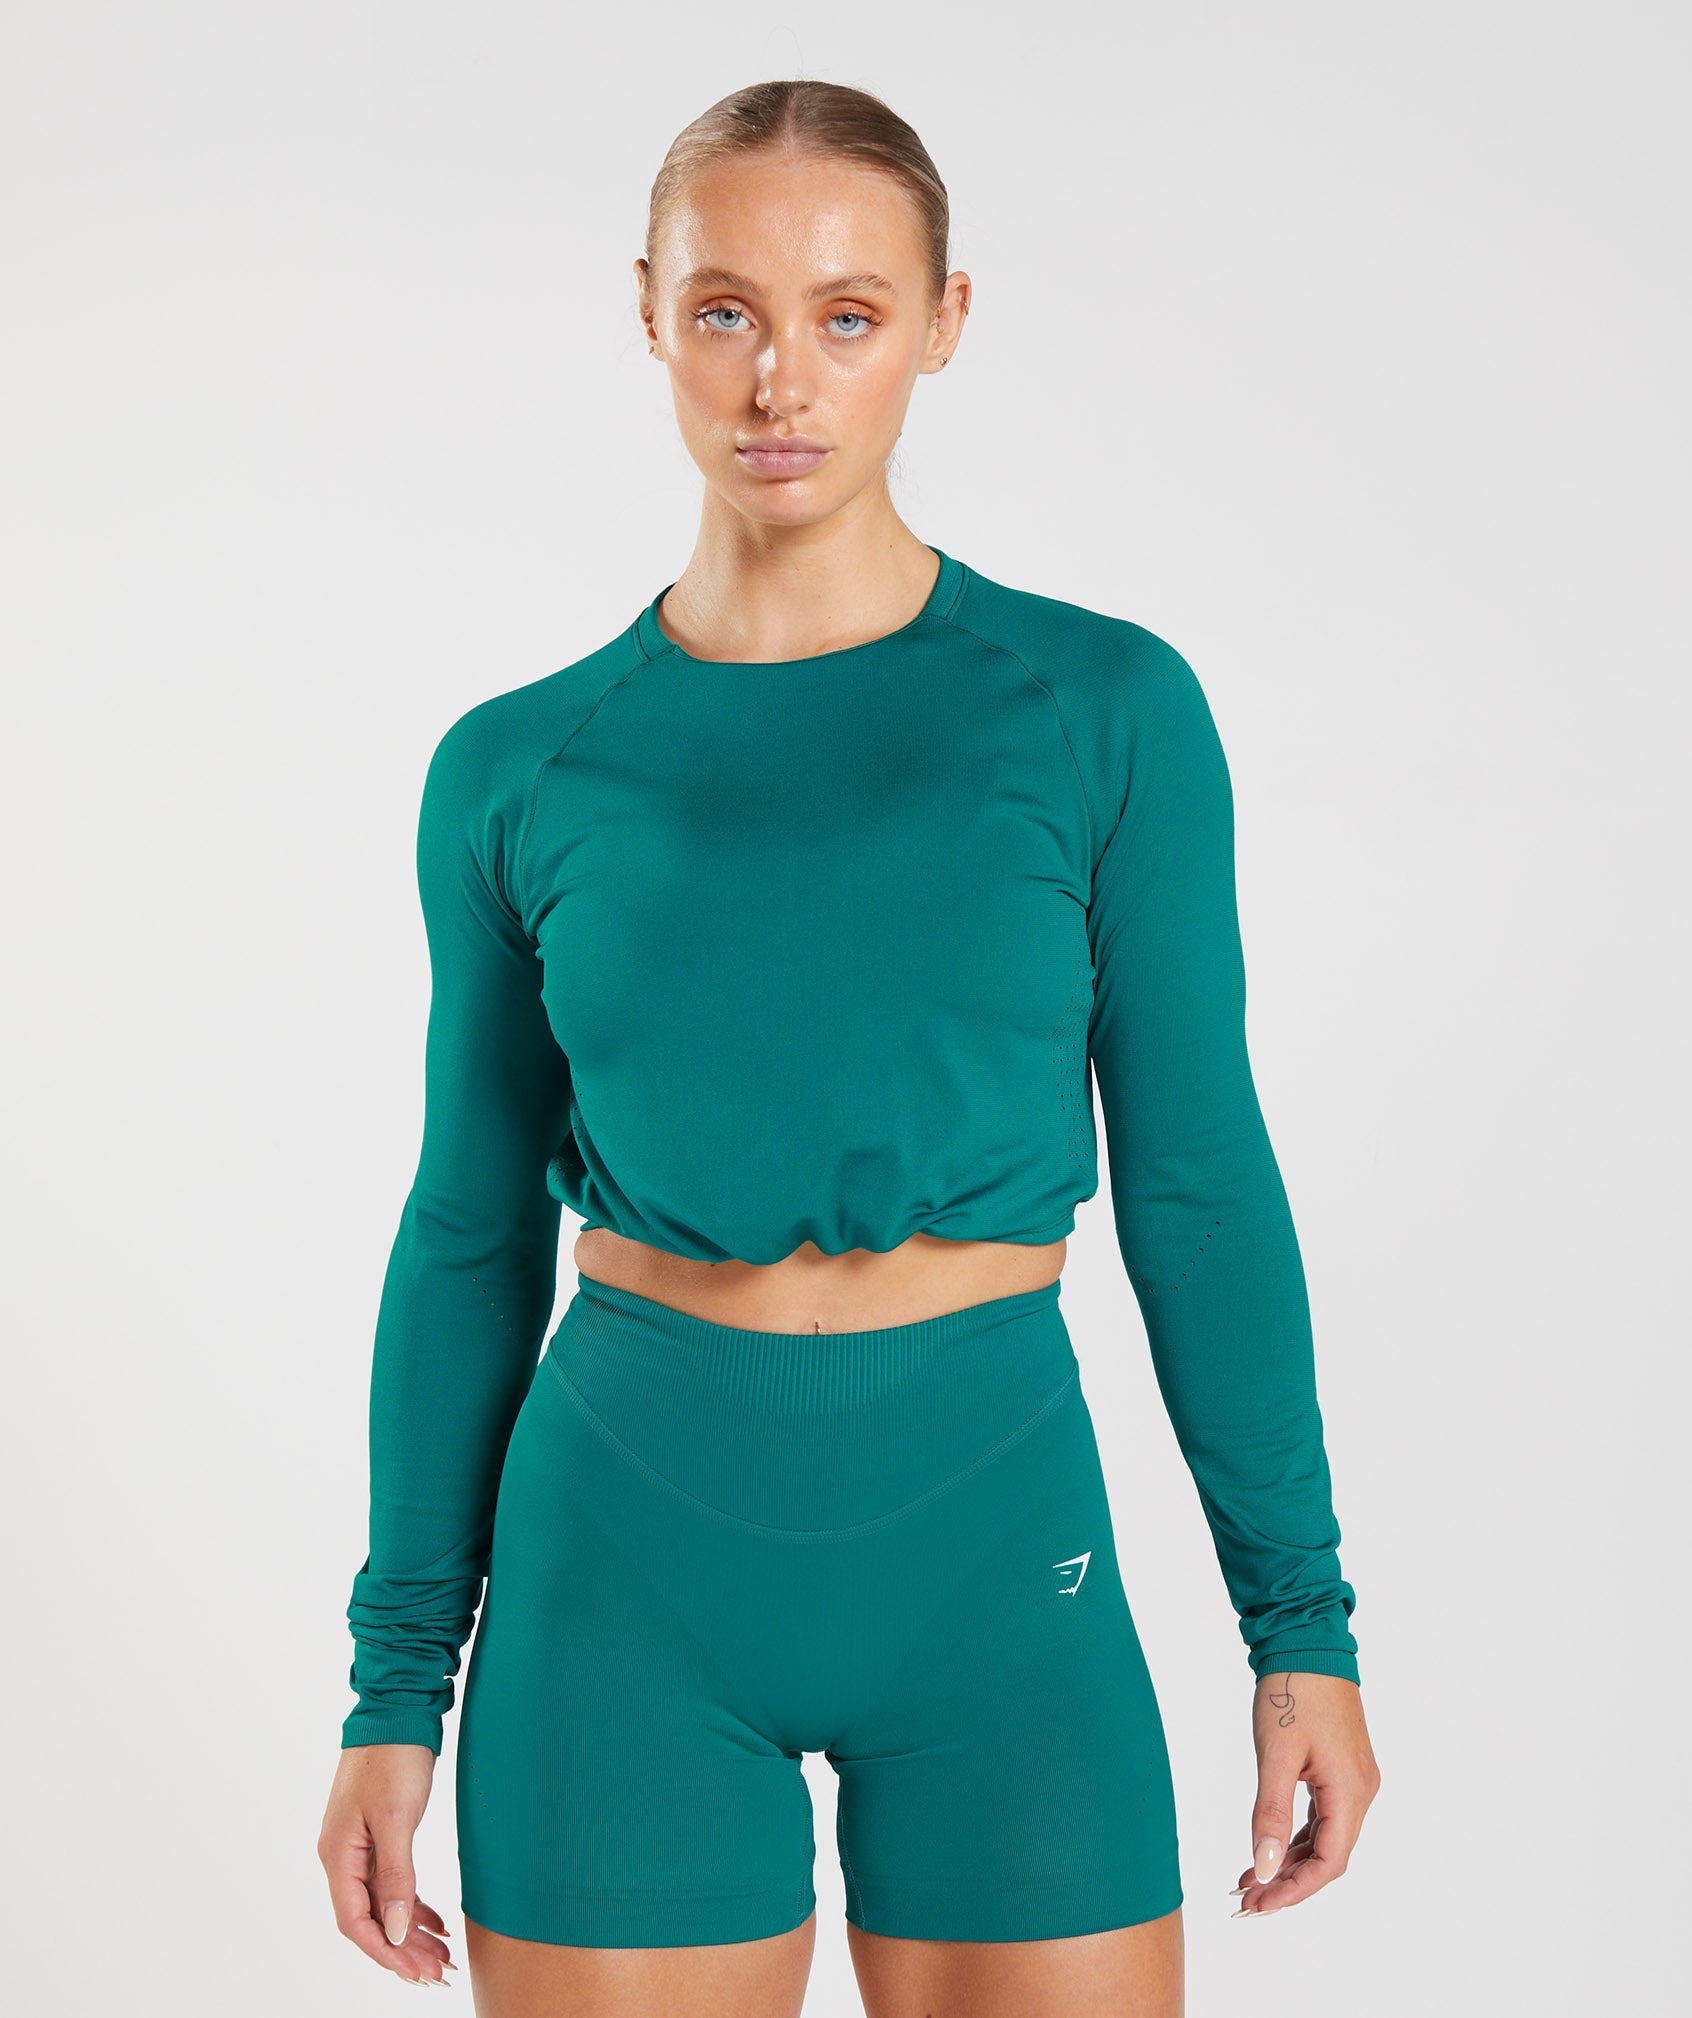 Sweat Seamless Long Sleeve Crop Top in {{variantColor} is out of stock